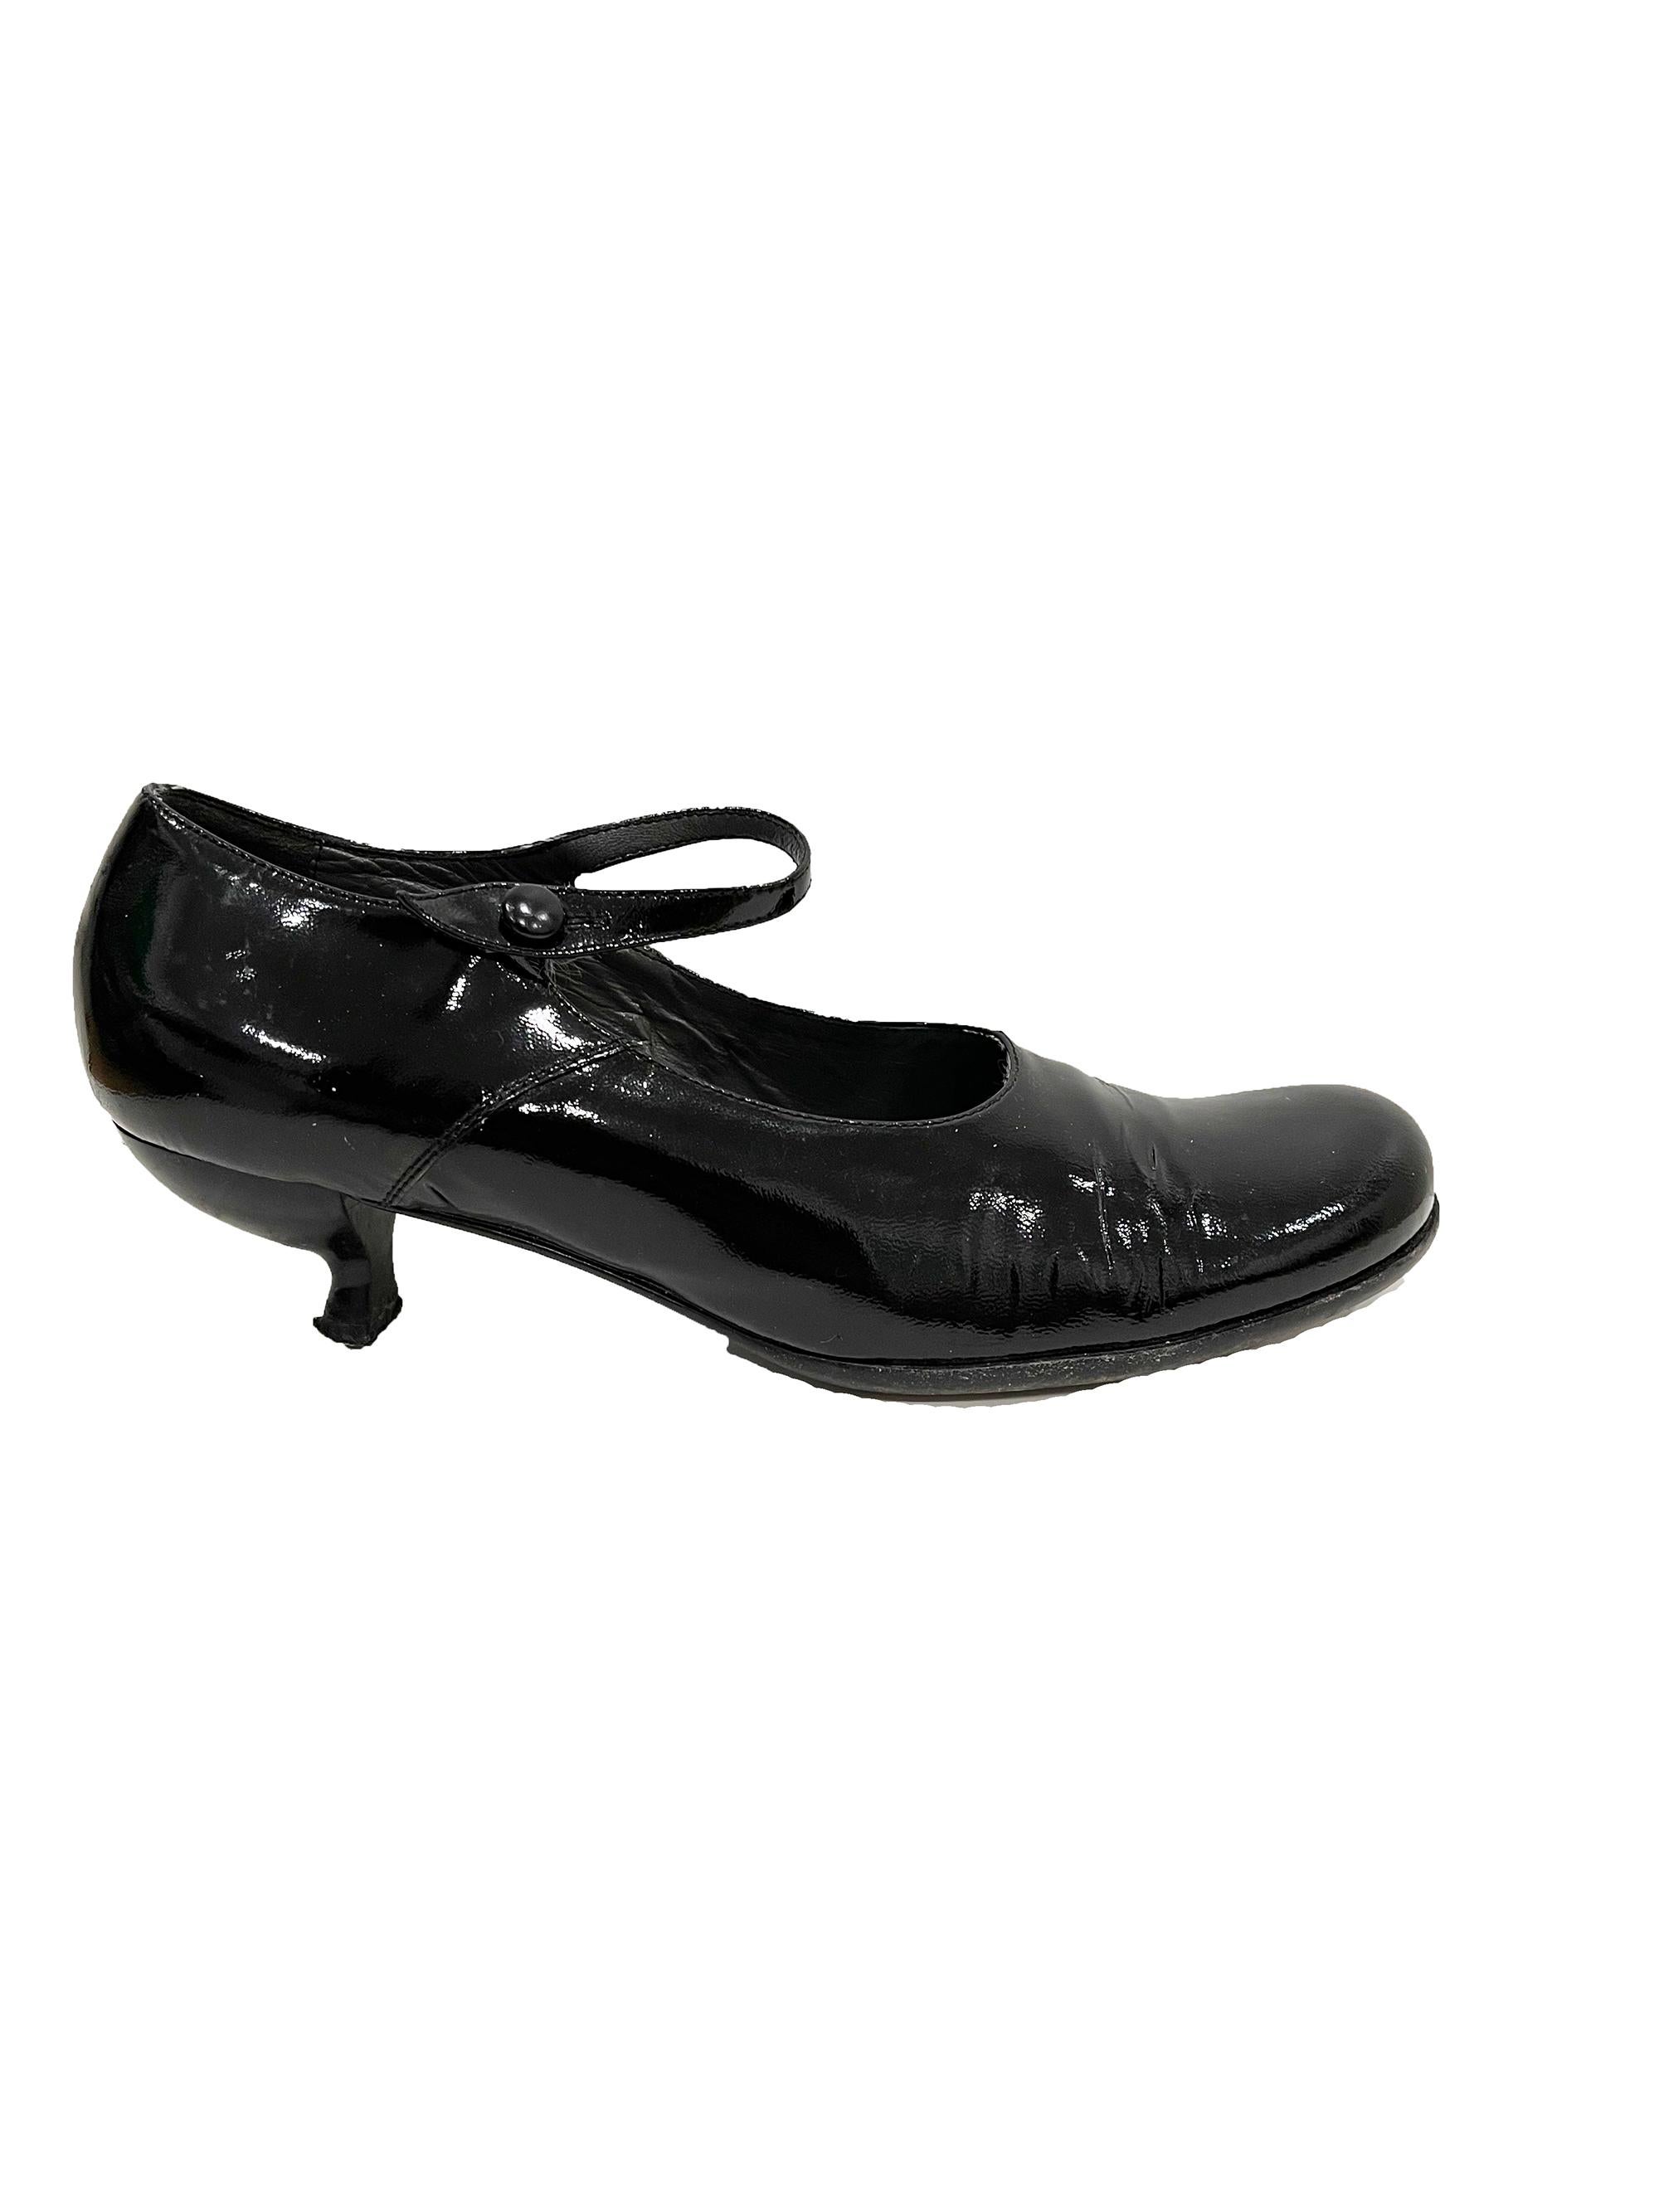 1990s Miu Miu patent leather kitten heels In Fair Condition For Sale In Austin, TX